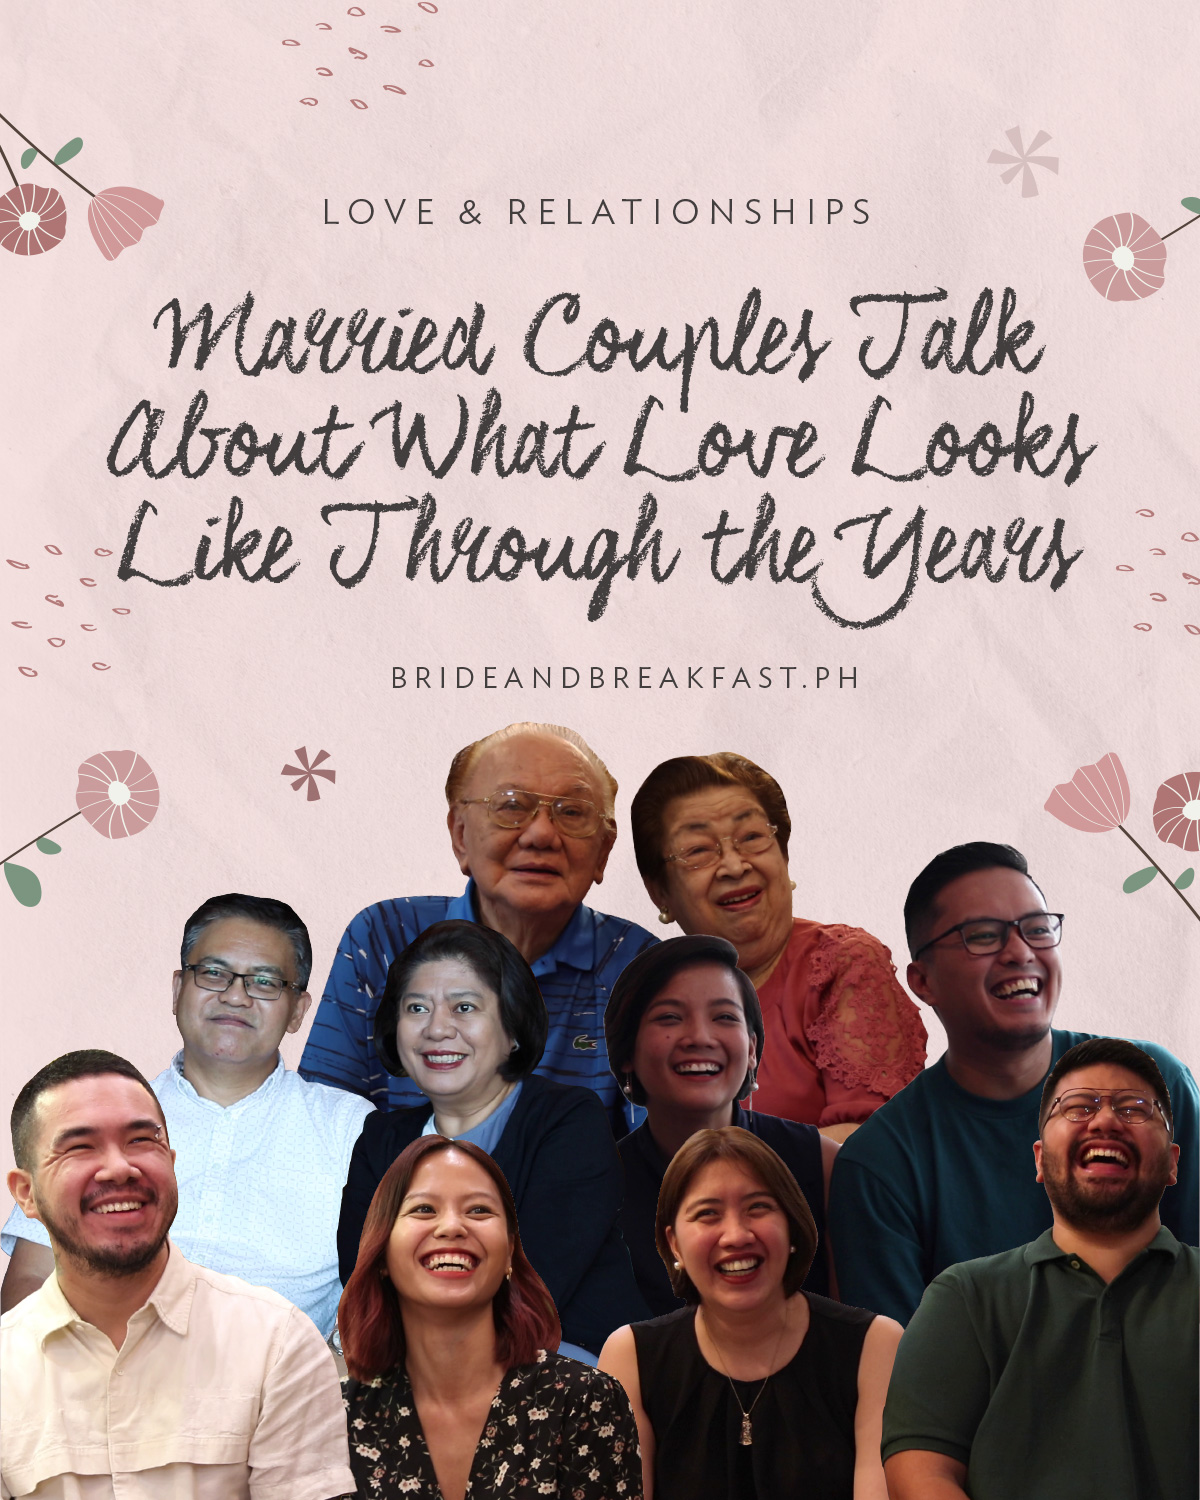 Married Couples Talk About What Love Looks Like Through the Years